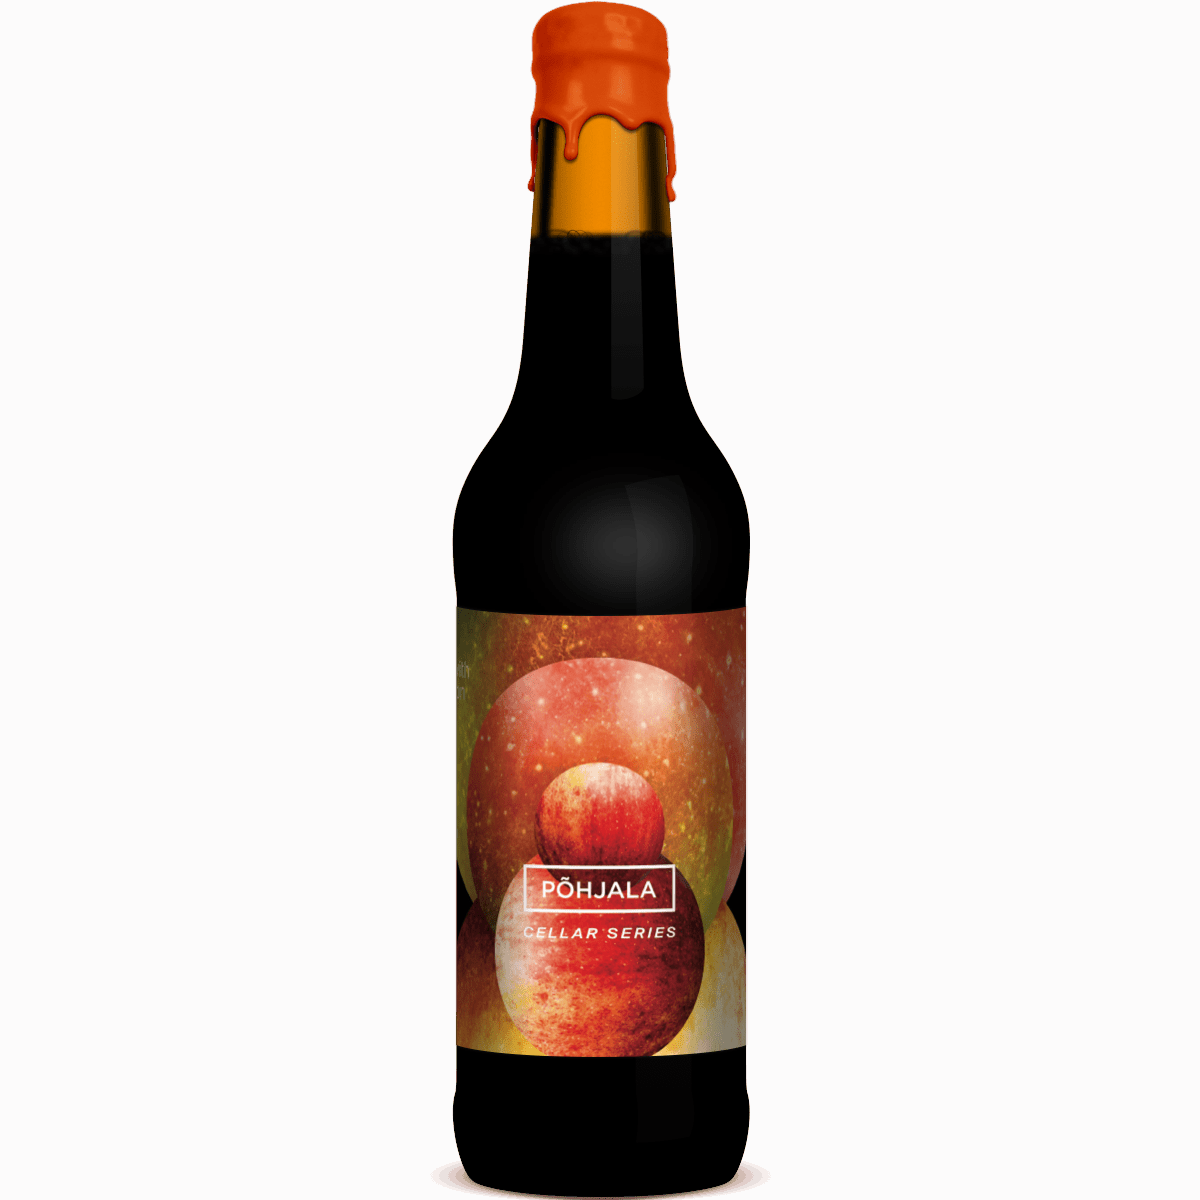 POHJALA STRUDEL STOUT Barrel Aged Imperial Stout with Apple and Cinnamon